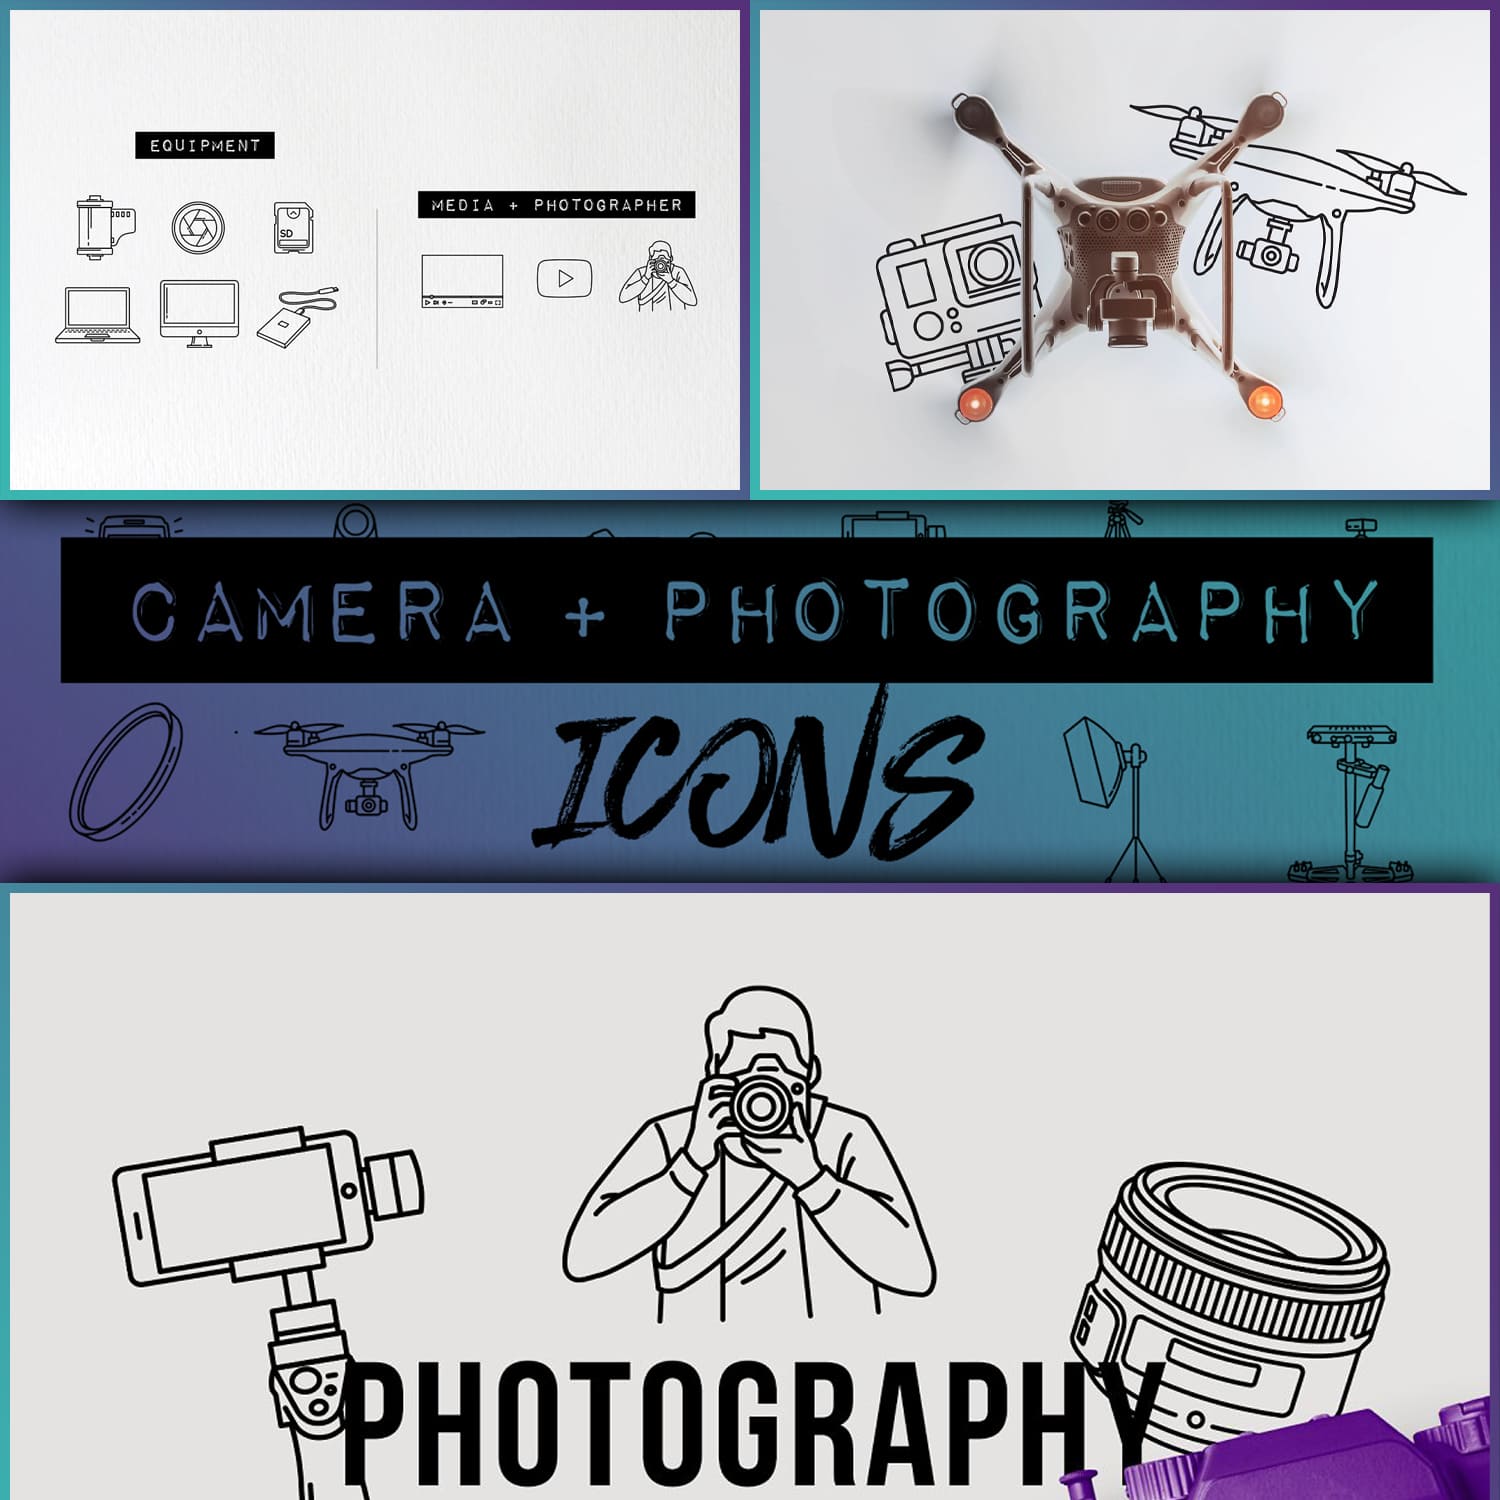 Icons with equipment for creating photos.